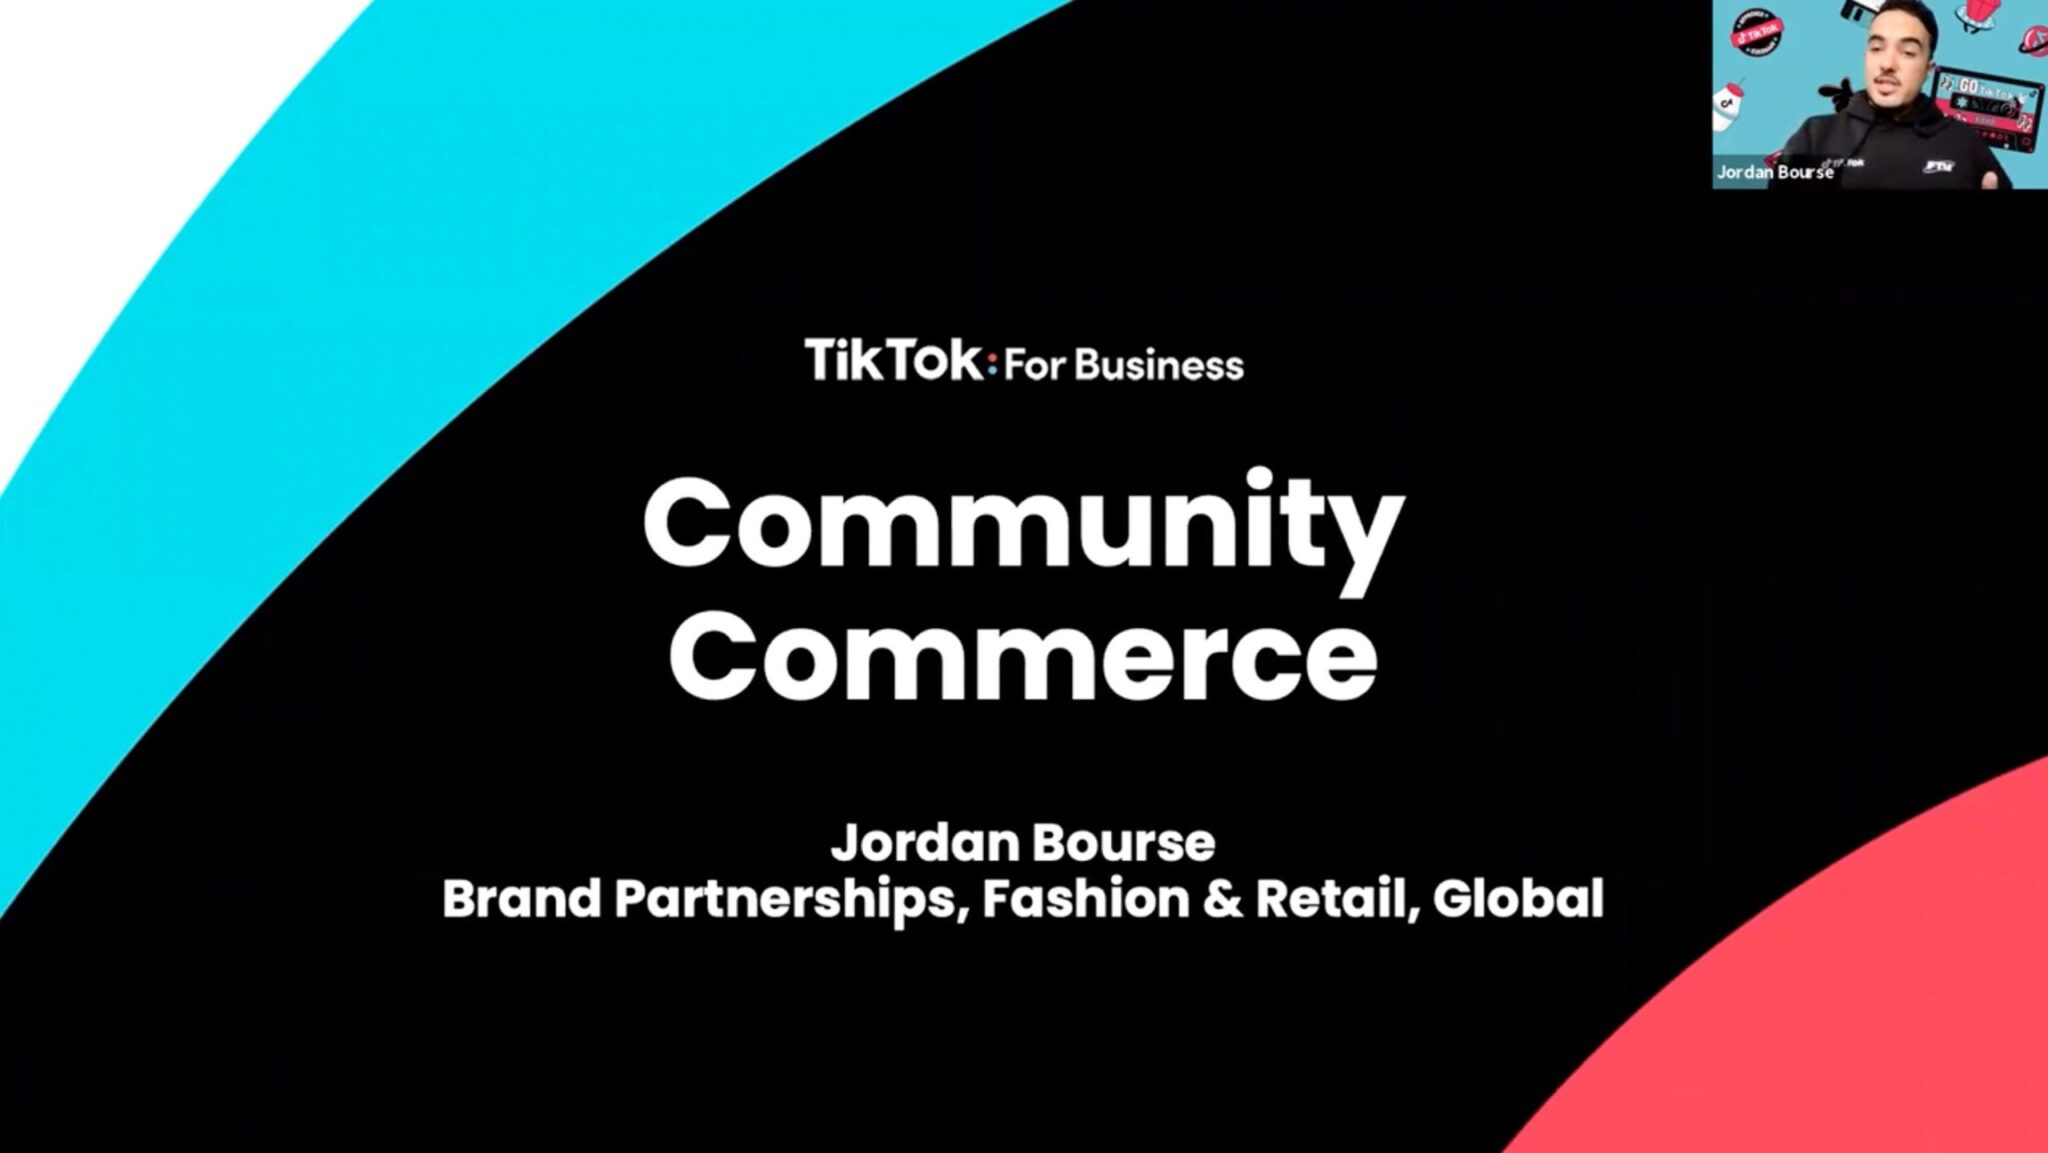 Watch our Social Commerce webinar in partnership with TikTok